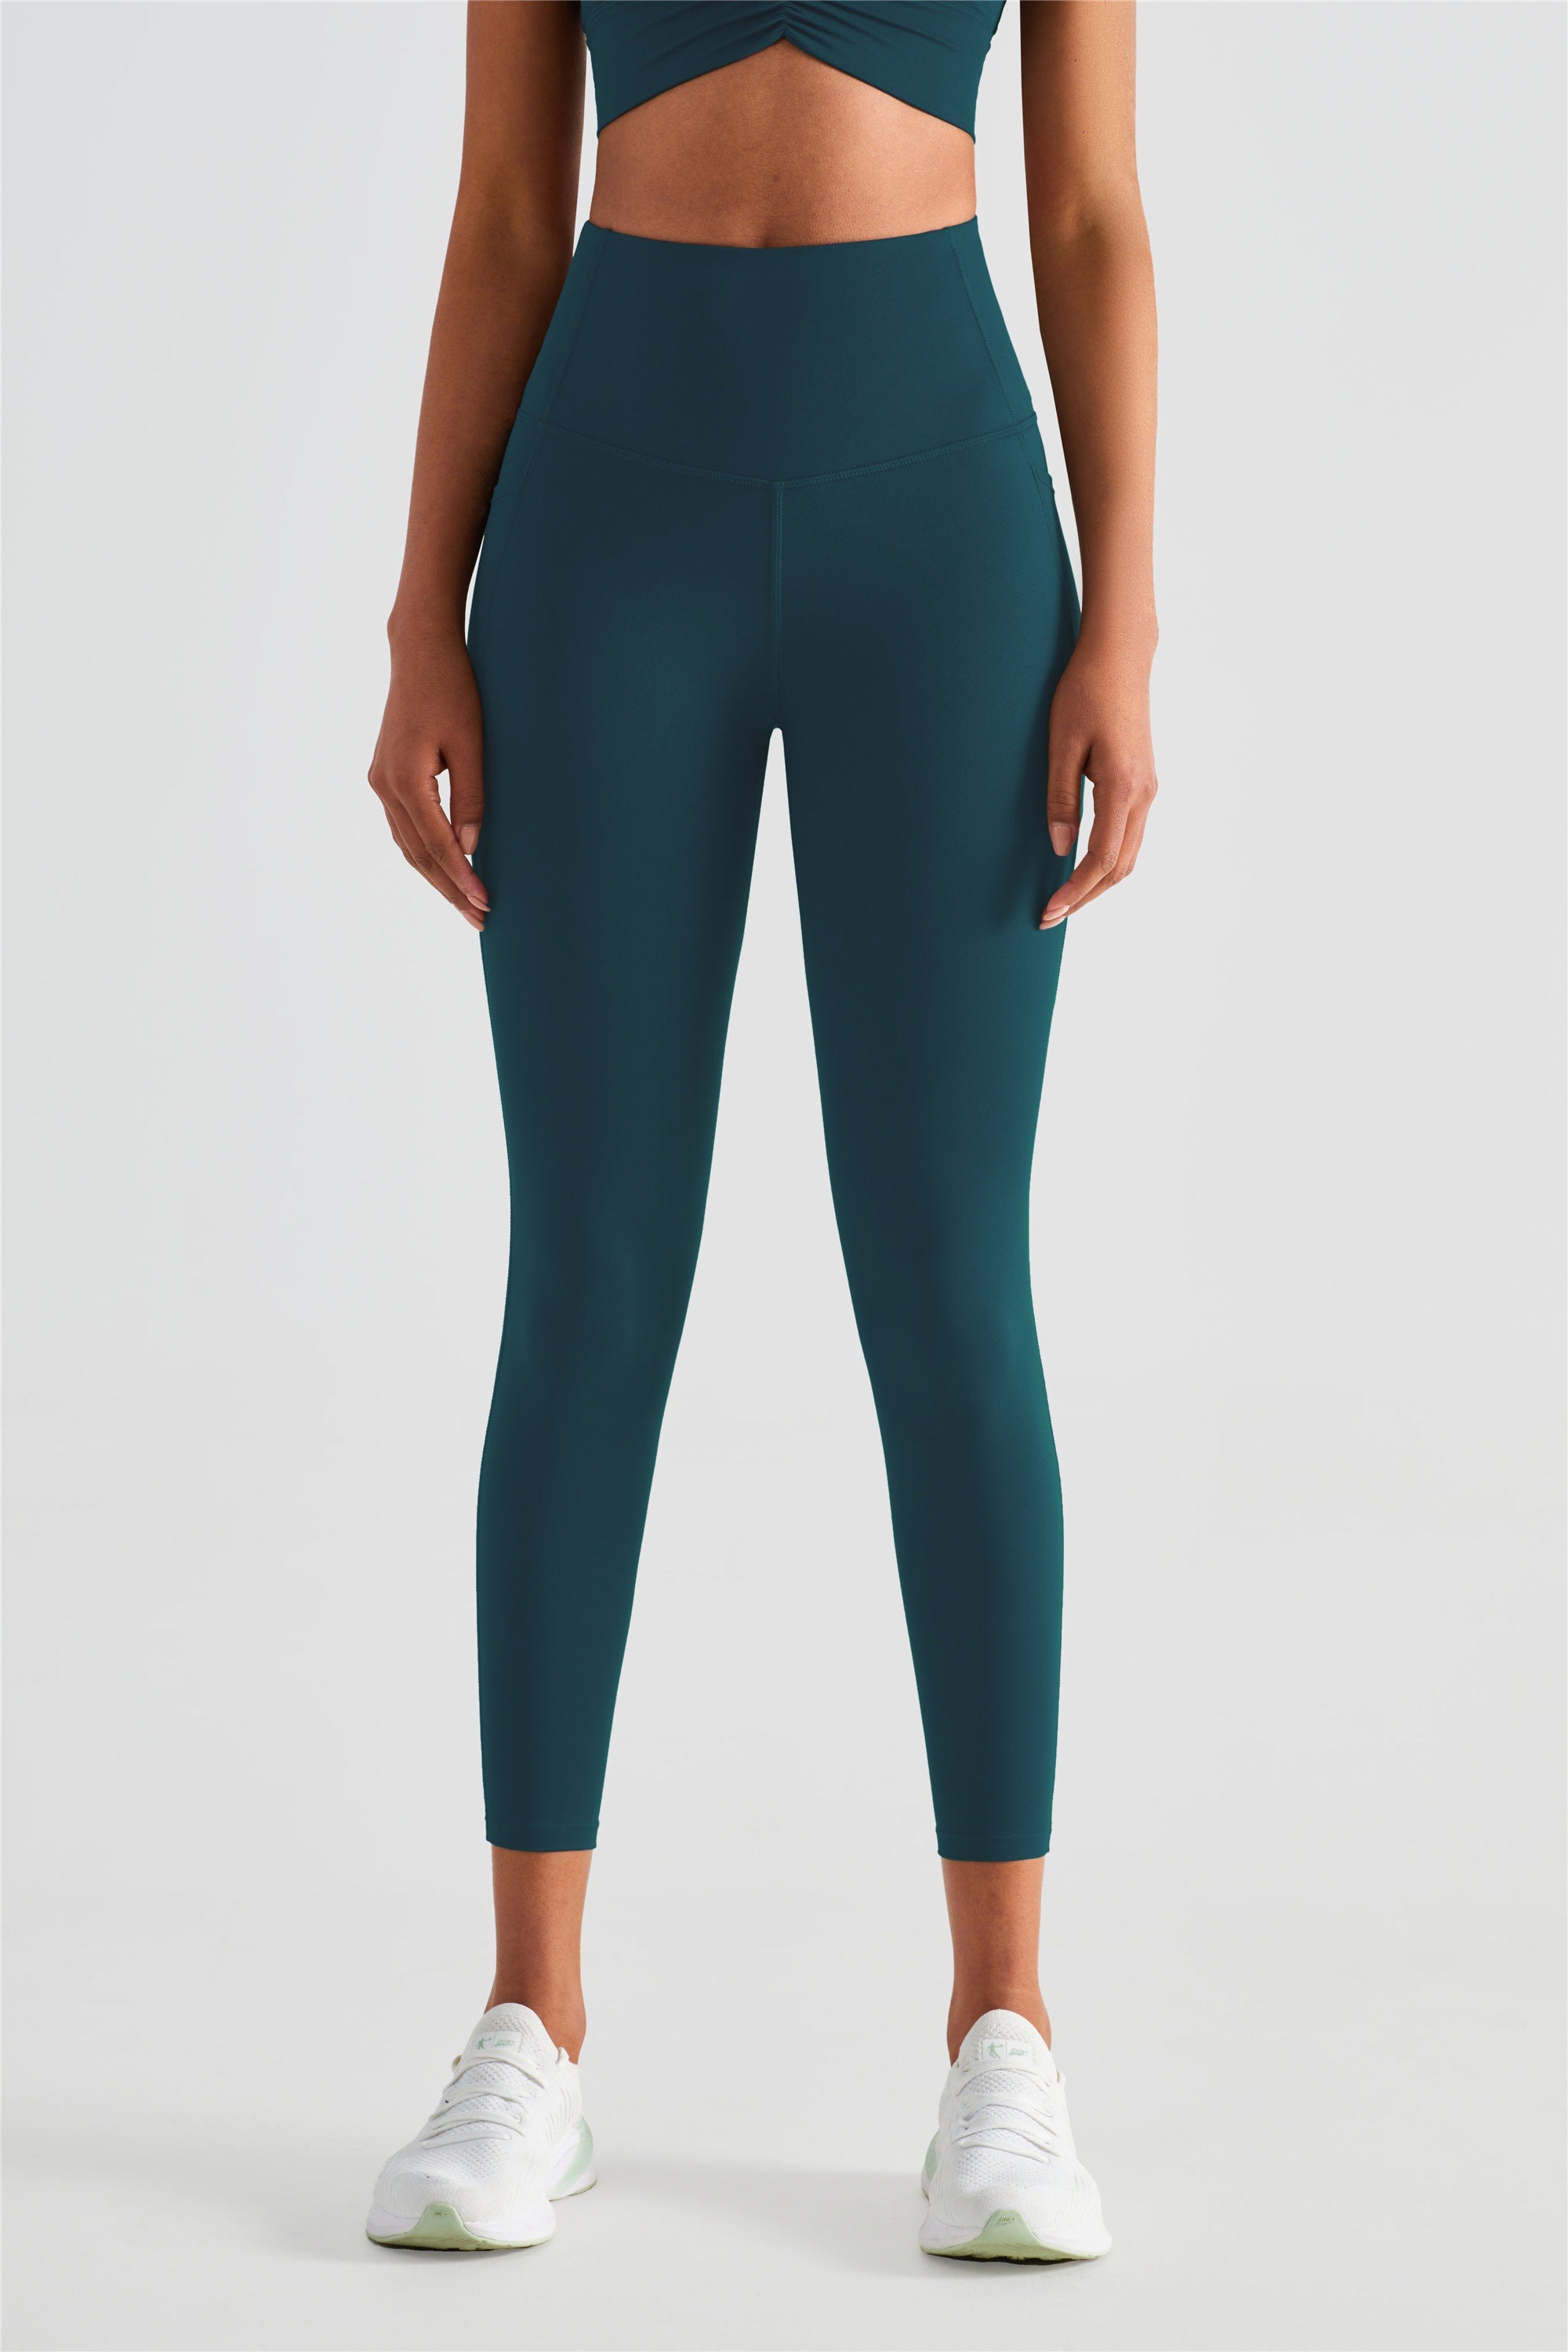 Hunter Green Womens Tights | We Love Colors